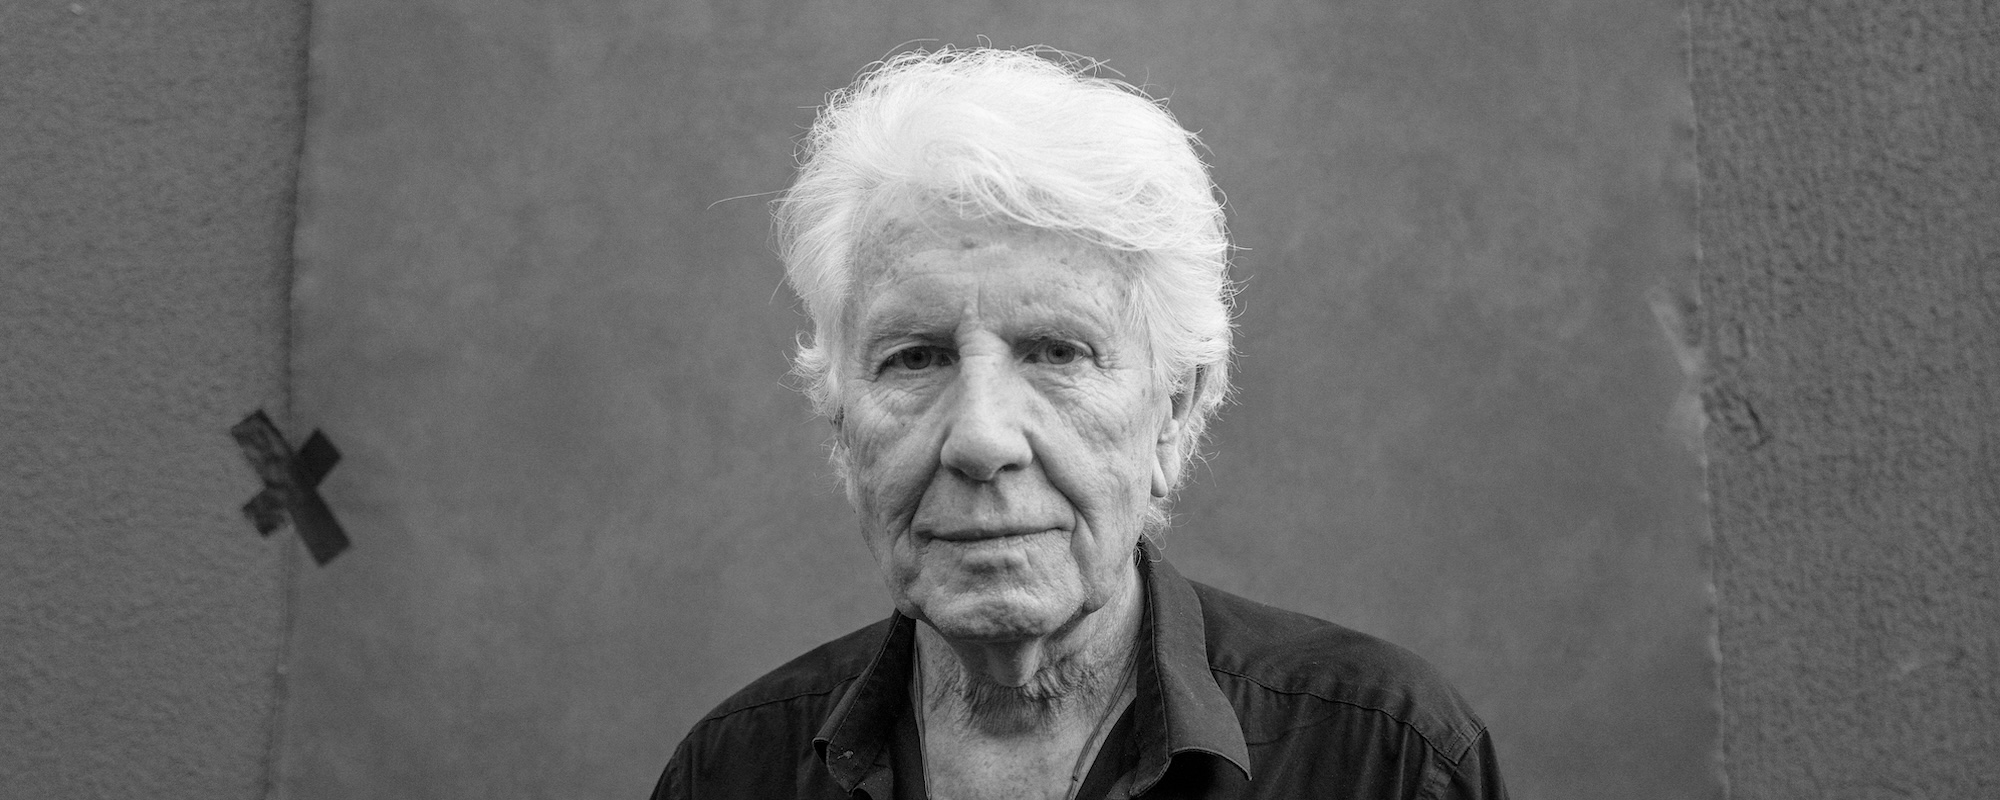 Graham Nash Laments Witnessing Crosby, Stills, Nash & Young ‘Grow’ and ‘Fall’ on “I Watched It All Come Down”